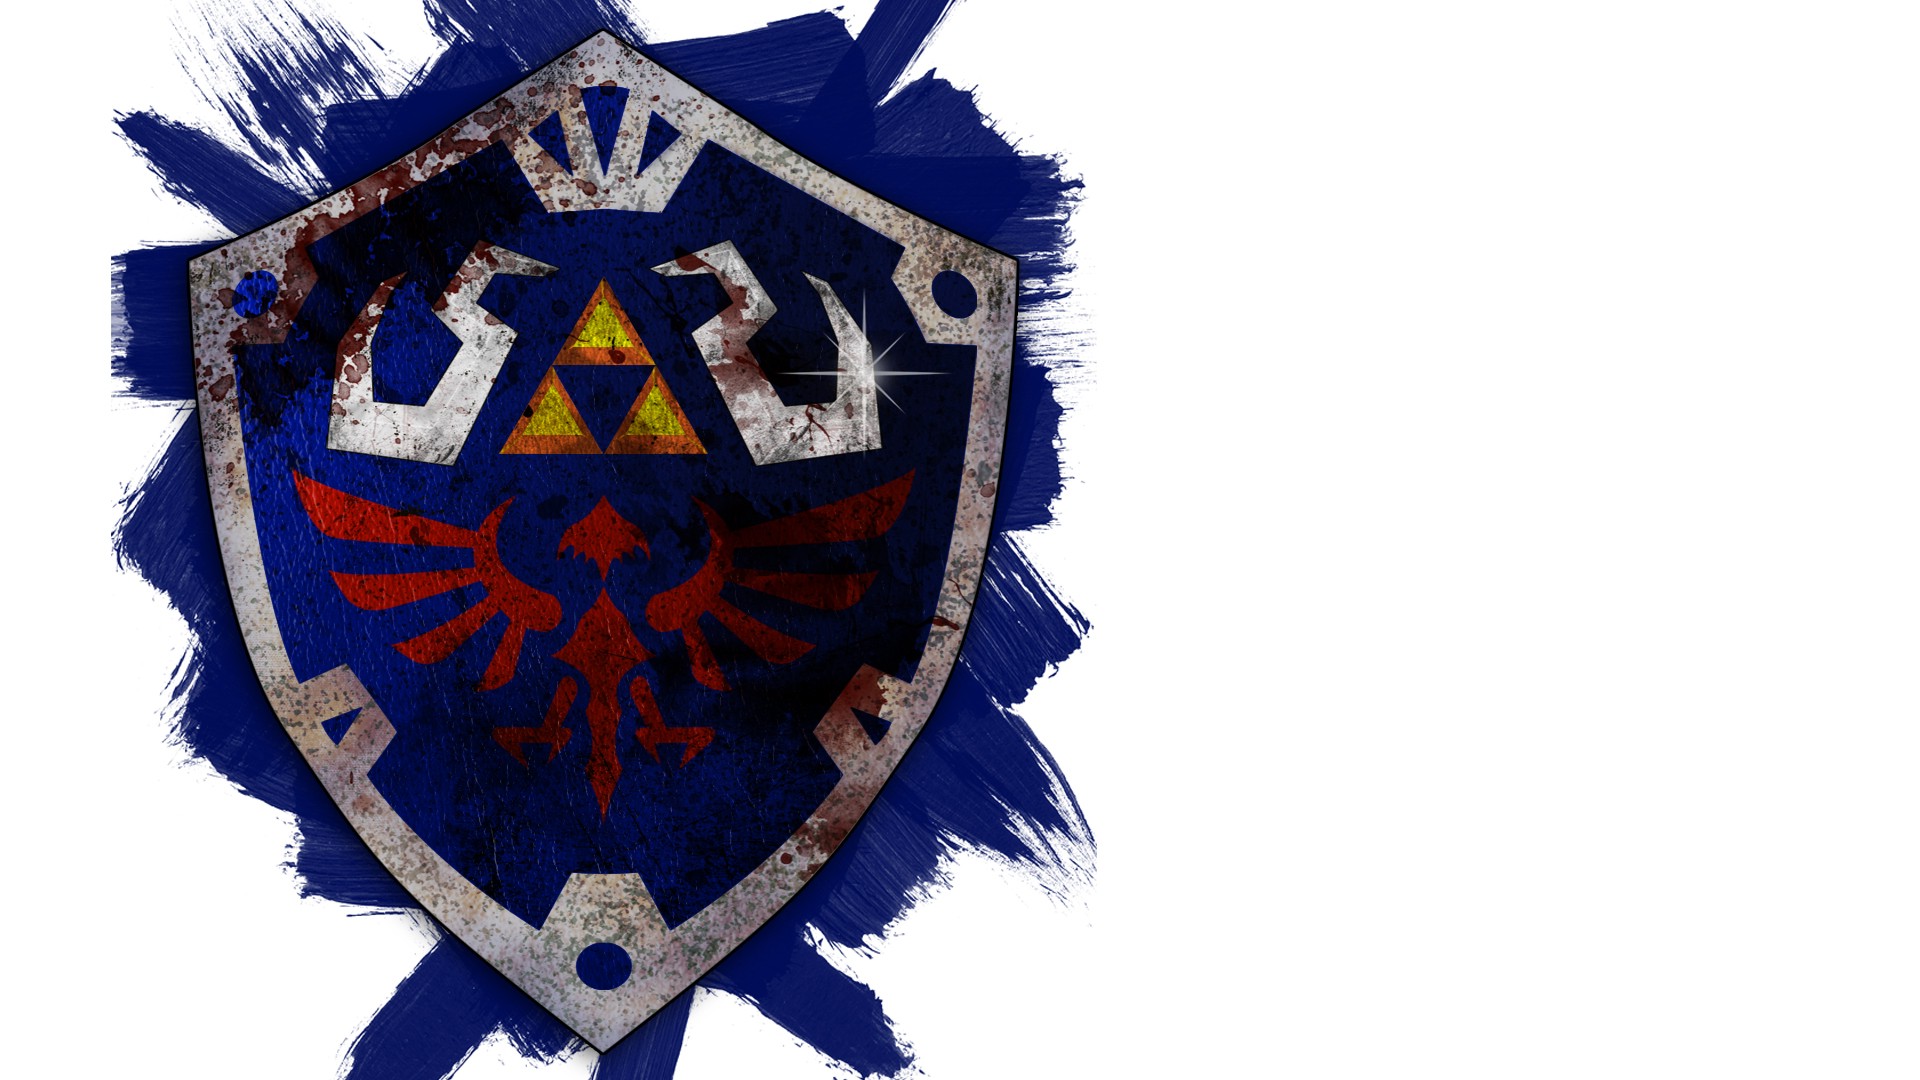 The Legend Of Zelda Hylian Crest Video Games Wallpapers Hd Images, Photos, Reviews